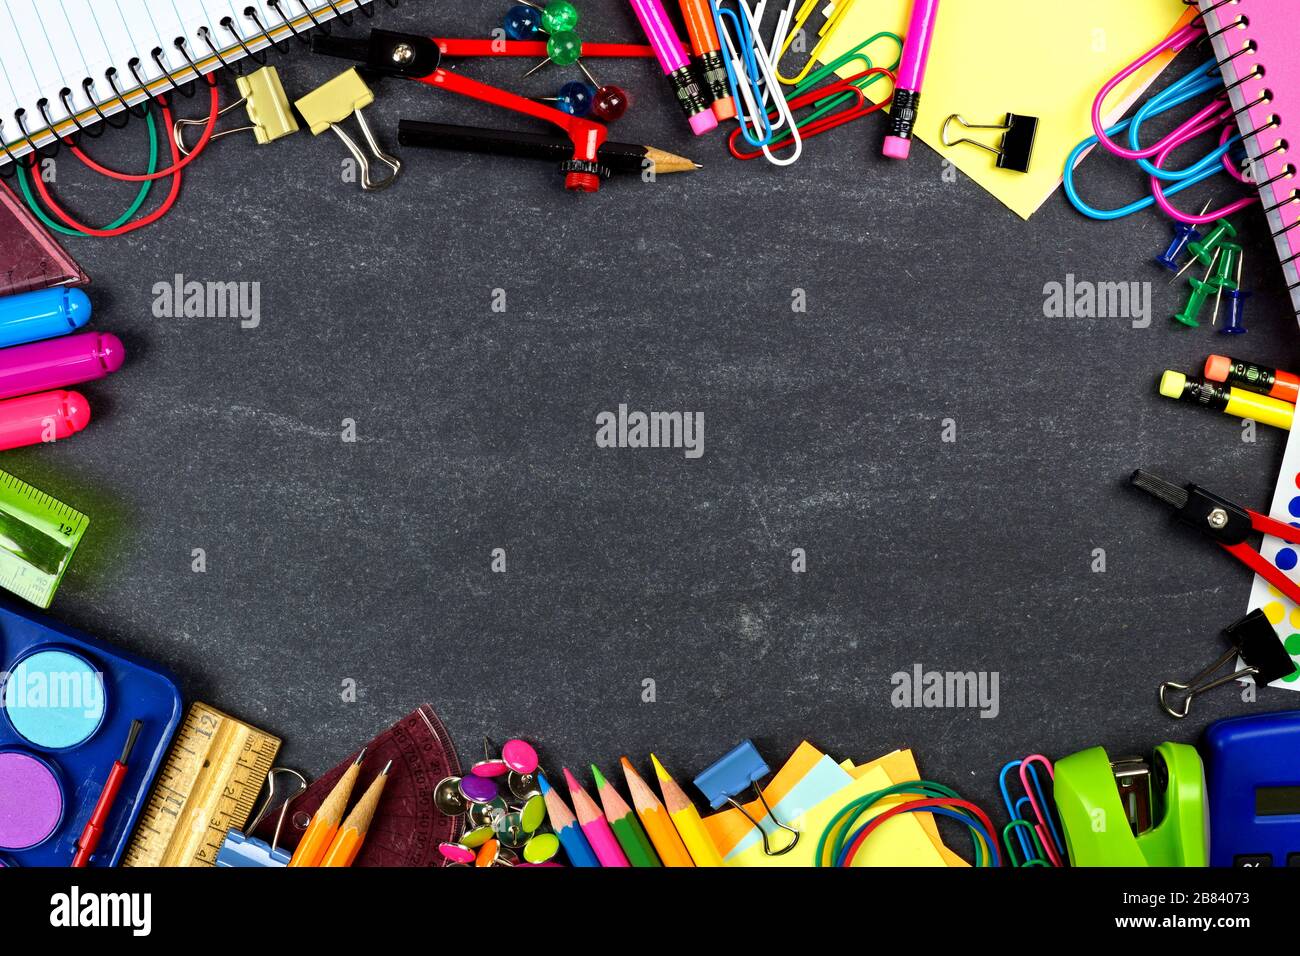 School supplies frame on a chalkboard background Stock Photo